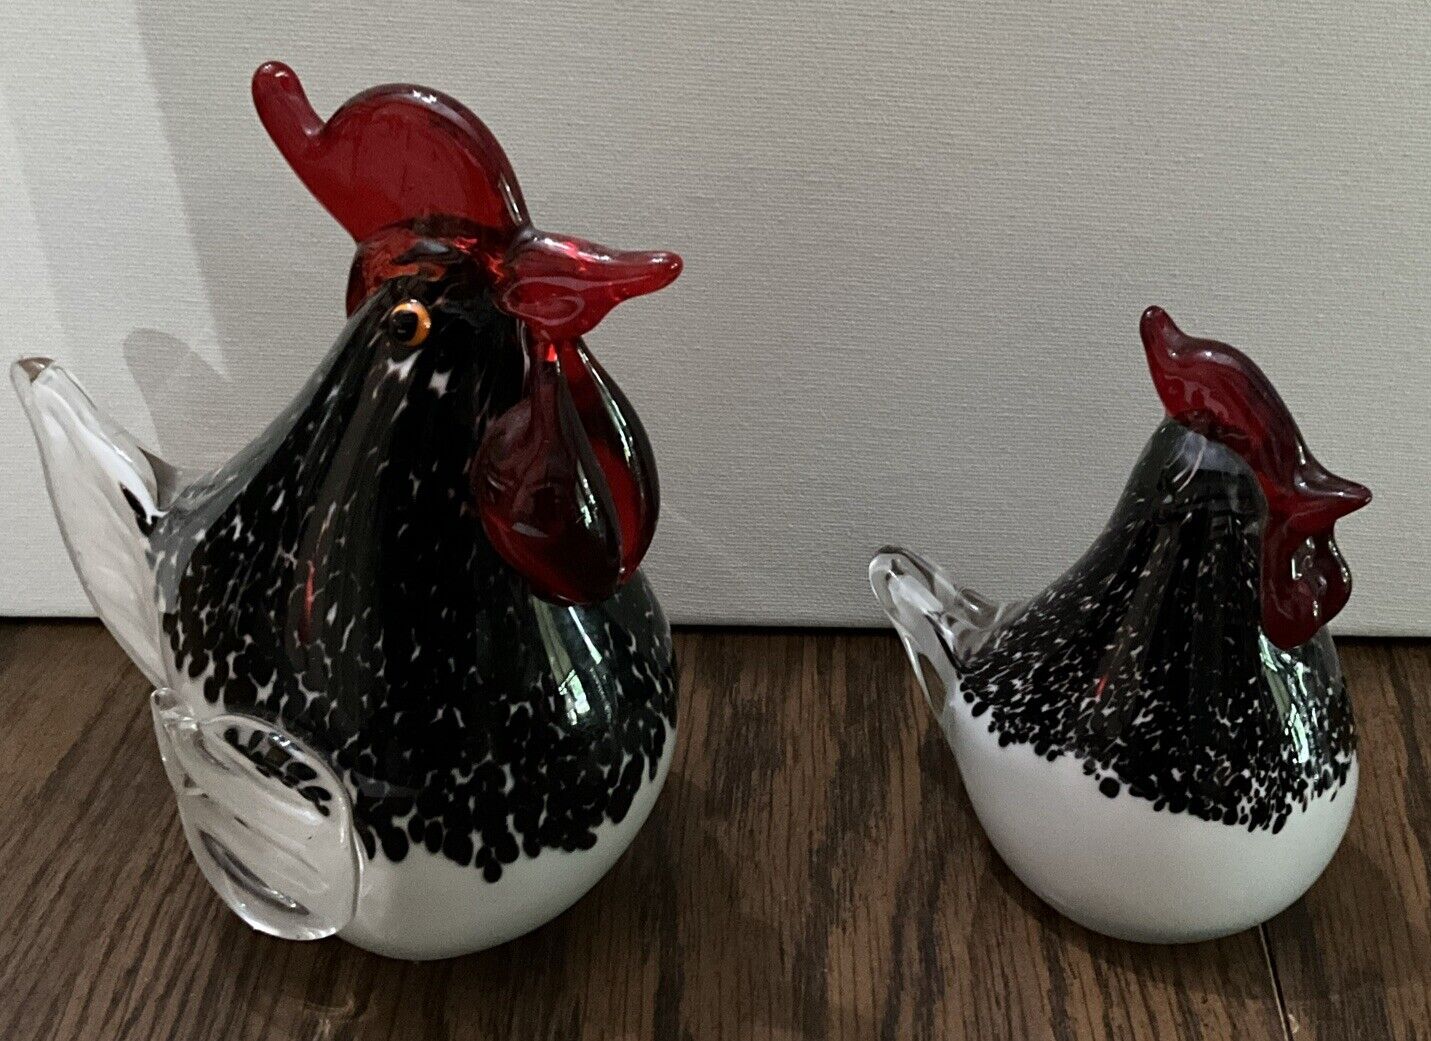 Handblown Art Glass Rooster And Matching Hen Statues Used As Paper Weights.